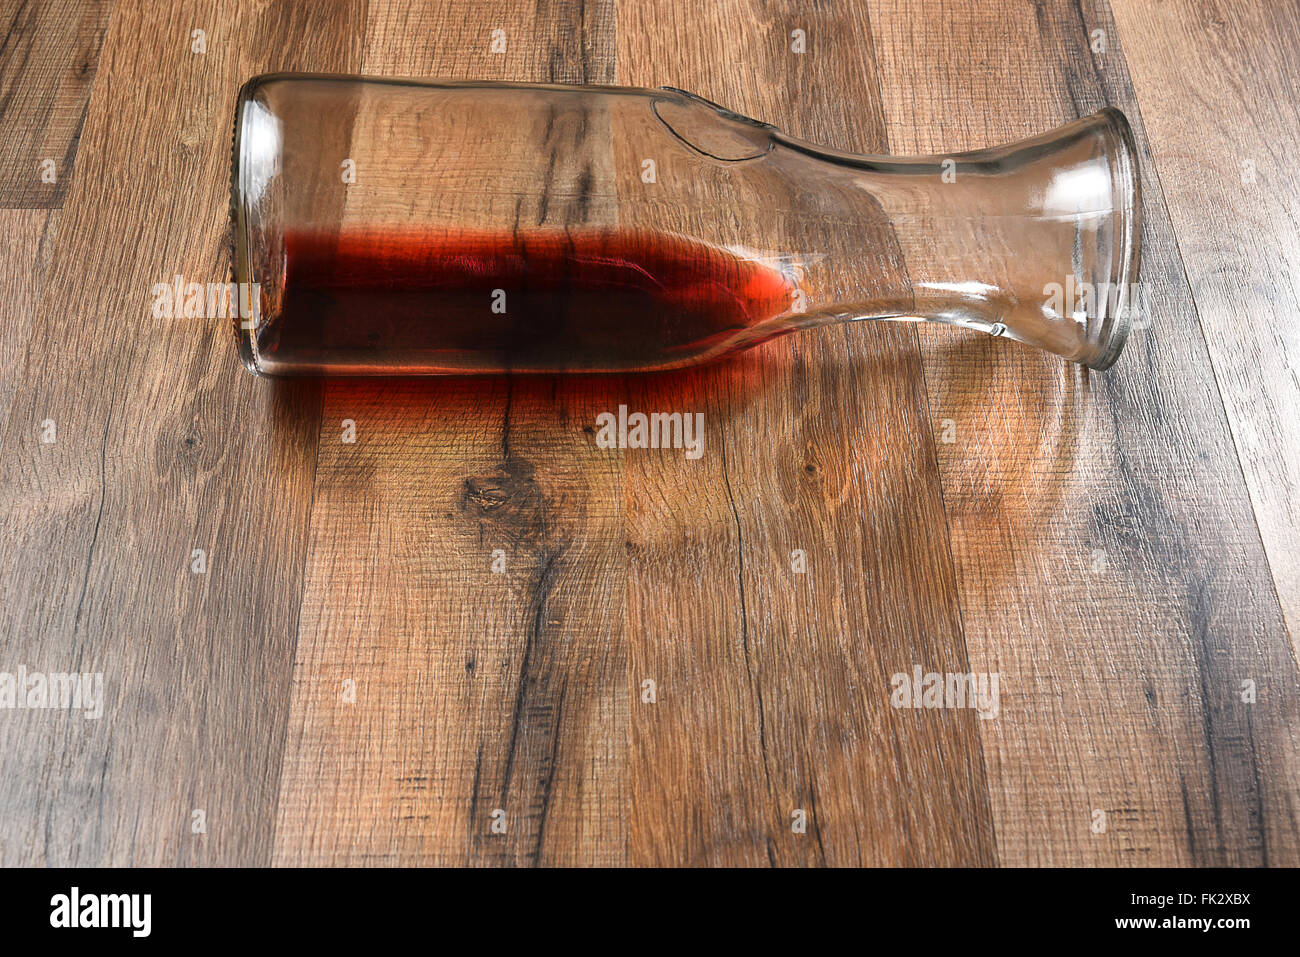 High angle view of a carafe of wine on its side on a wood table. Stock Photo